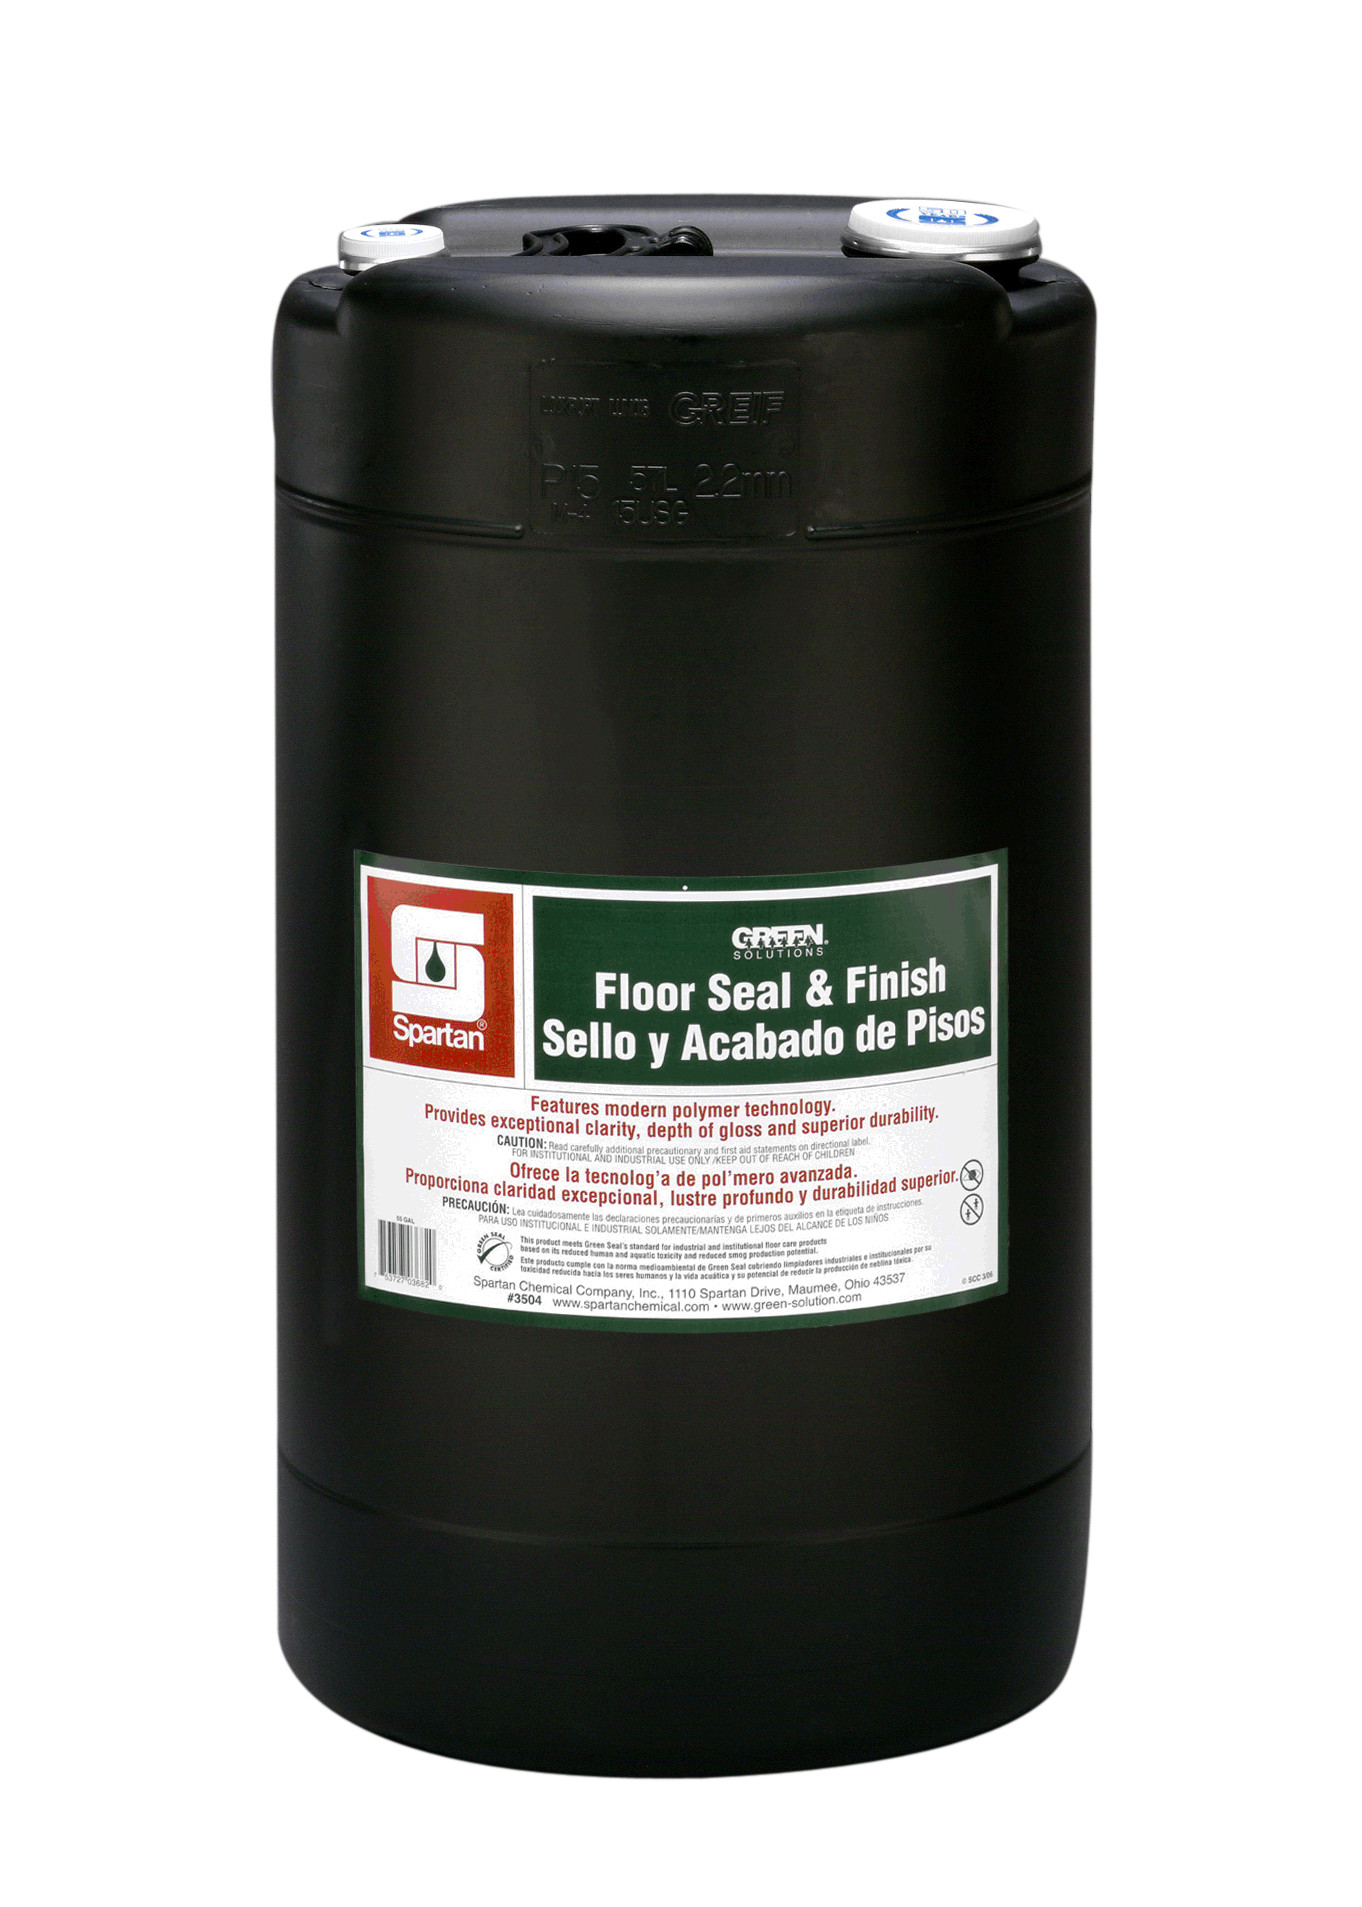 Spartan Chemical Company Green Solutions Floor Seal & Finish, 15 GAL DRUM